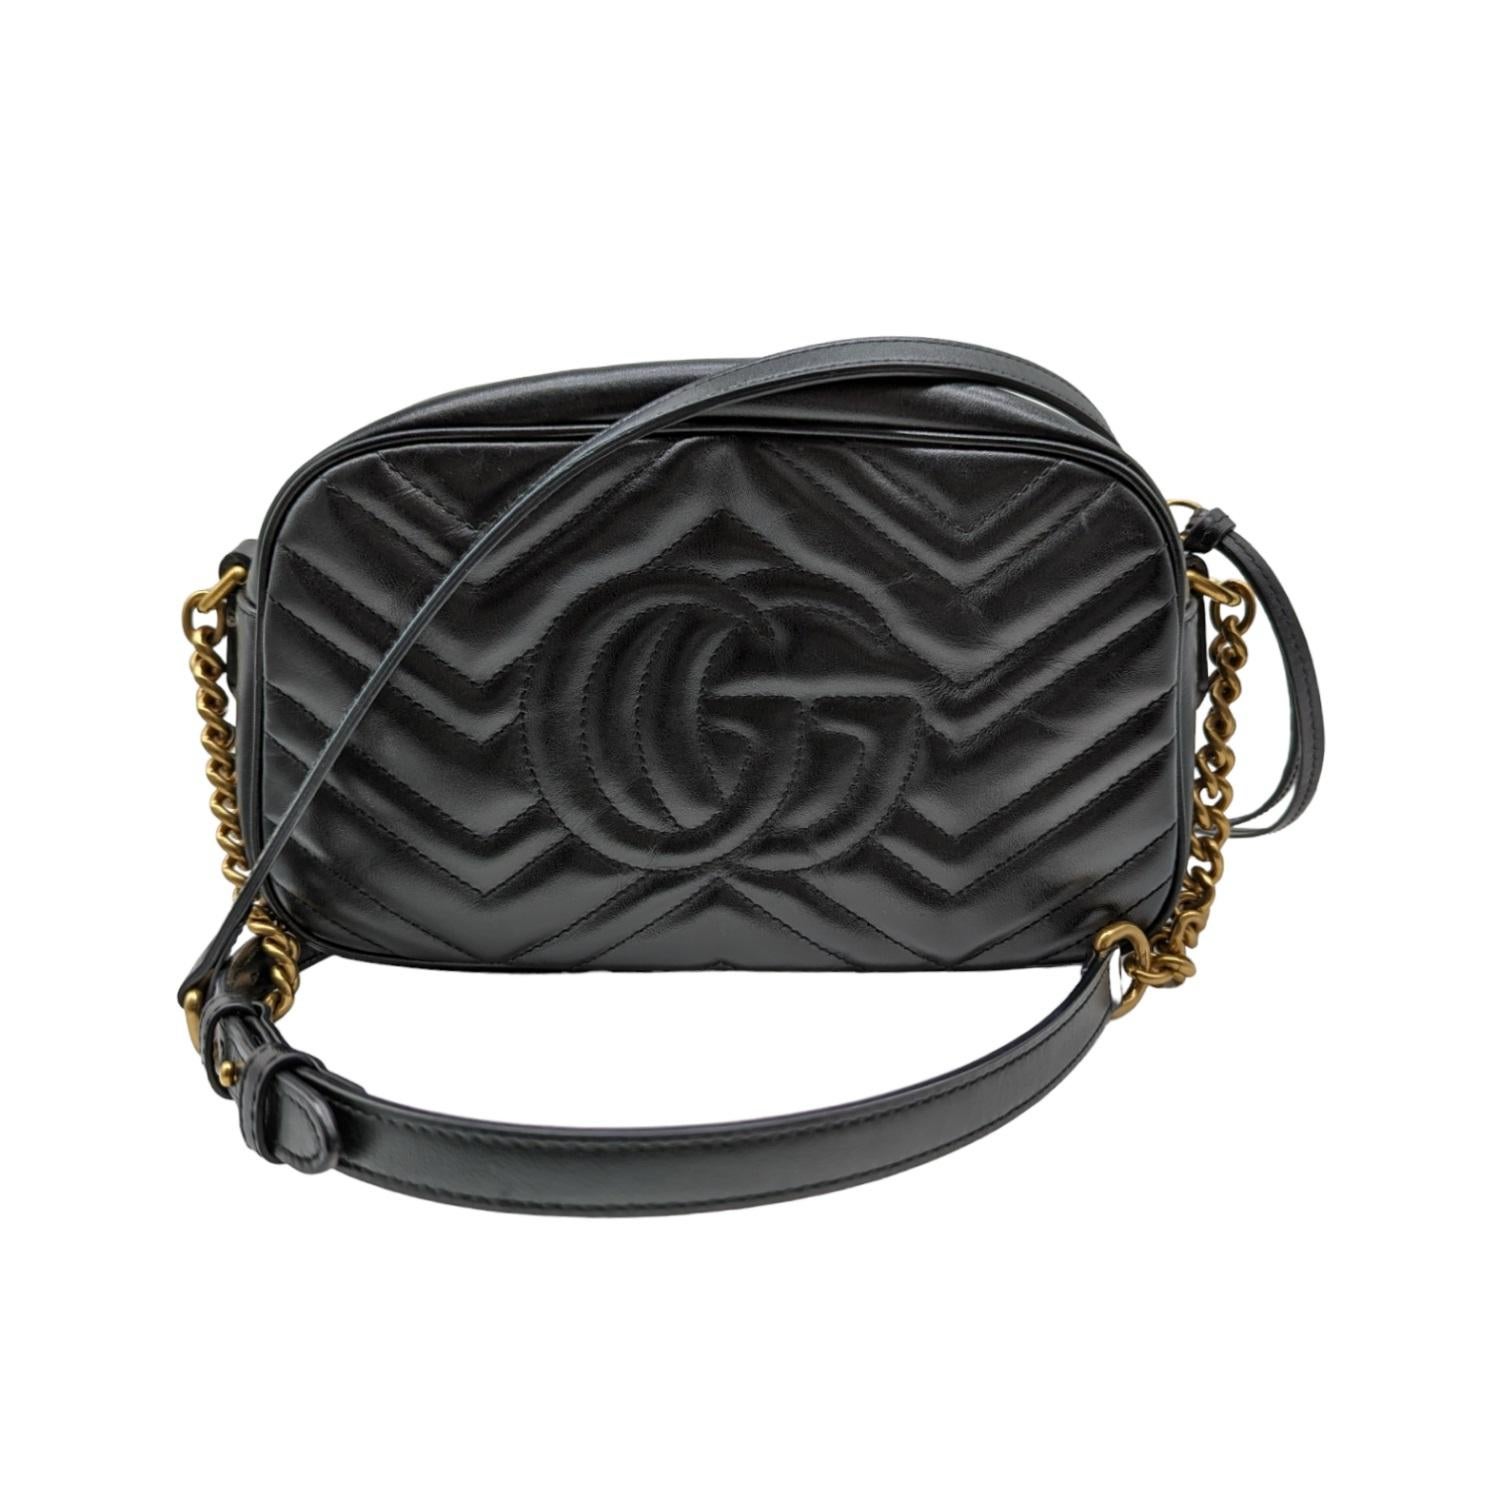 The small GG Marmont chain shoulder bag has a softly structured shape and a zip top closure with the Double G hardware. The chain shoulder strap has a leather shoulder detail. The camera bag is made in matelassé leather with a chevron design and GG